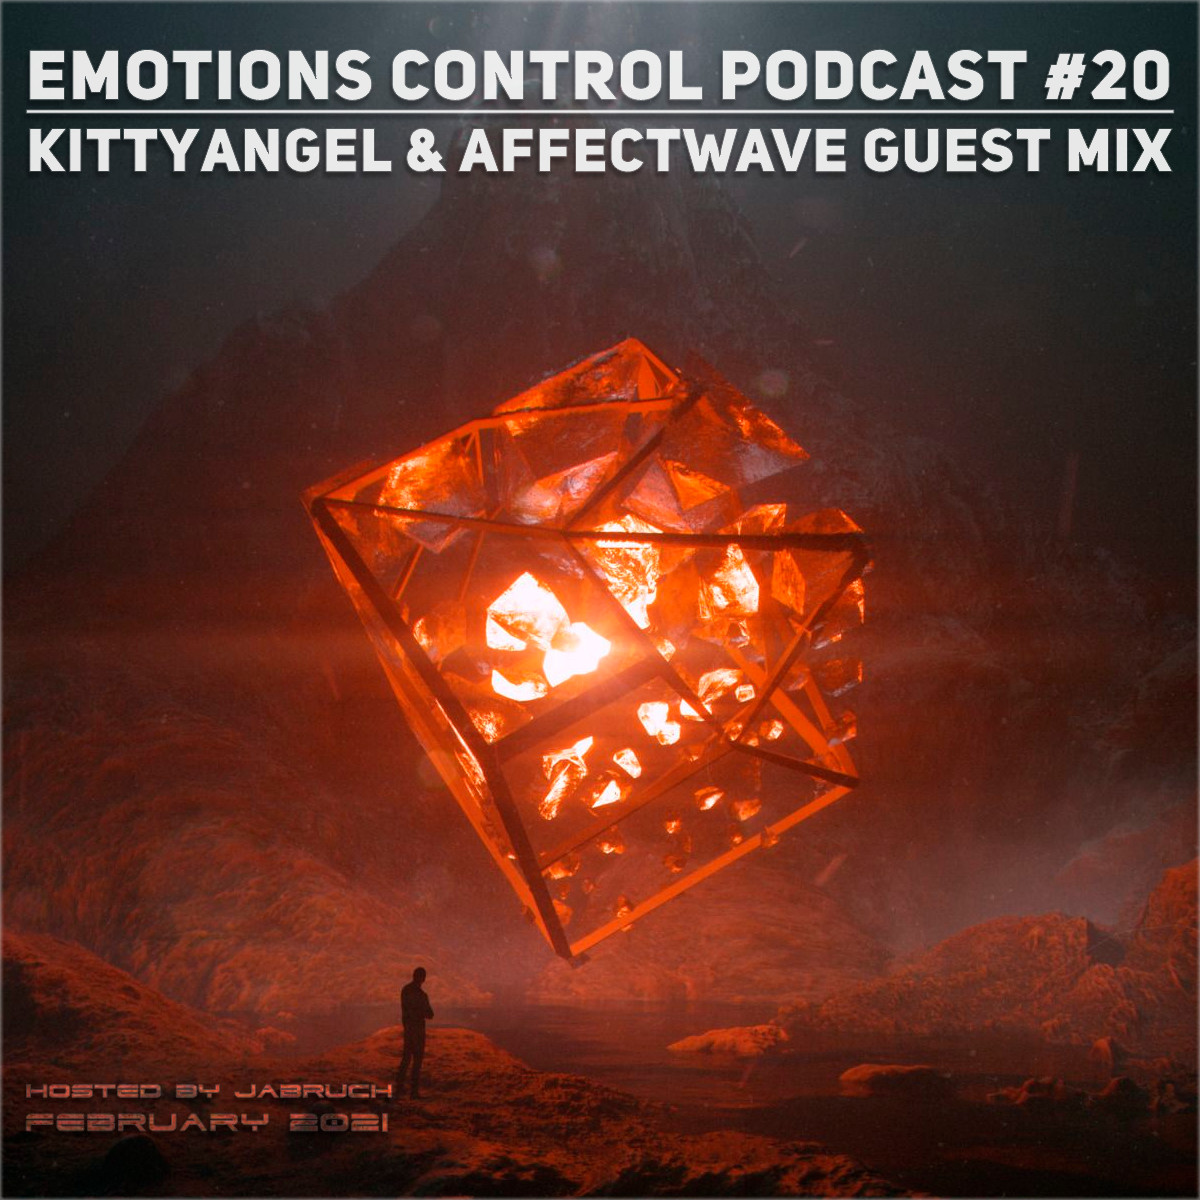 Emotions Control Podcast #20 Kittyangel & Affectwave Guest Mix [February 2021] #20